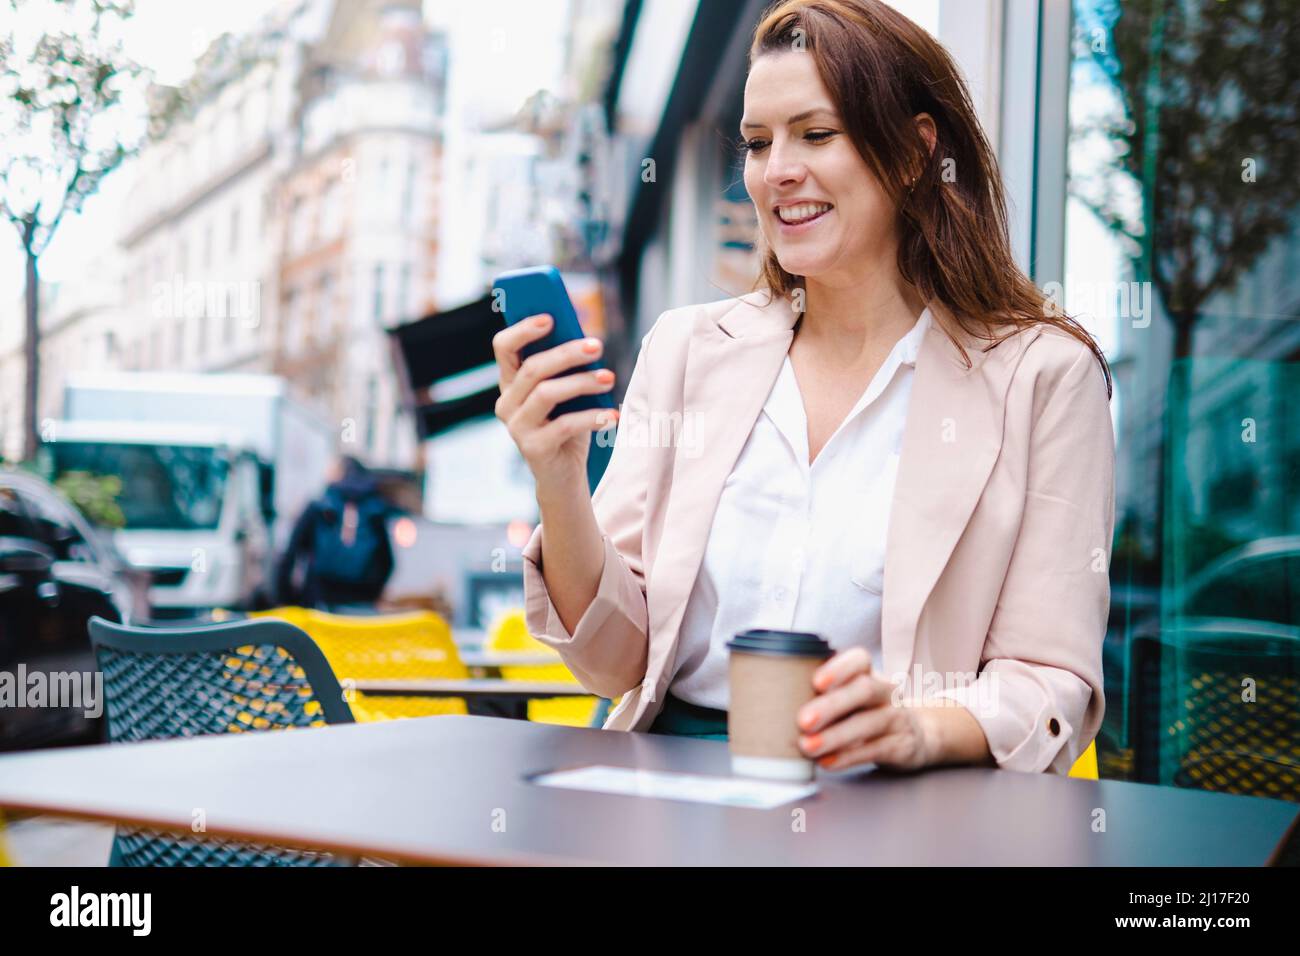 Smiling woman with disposable coffee cup using smart phone in cafe Stock Photo